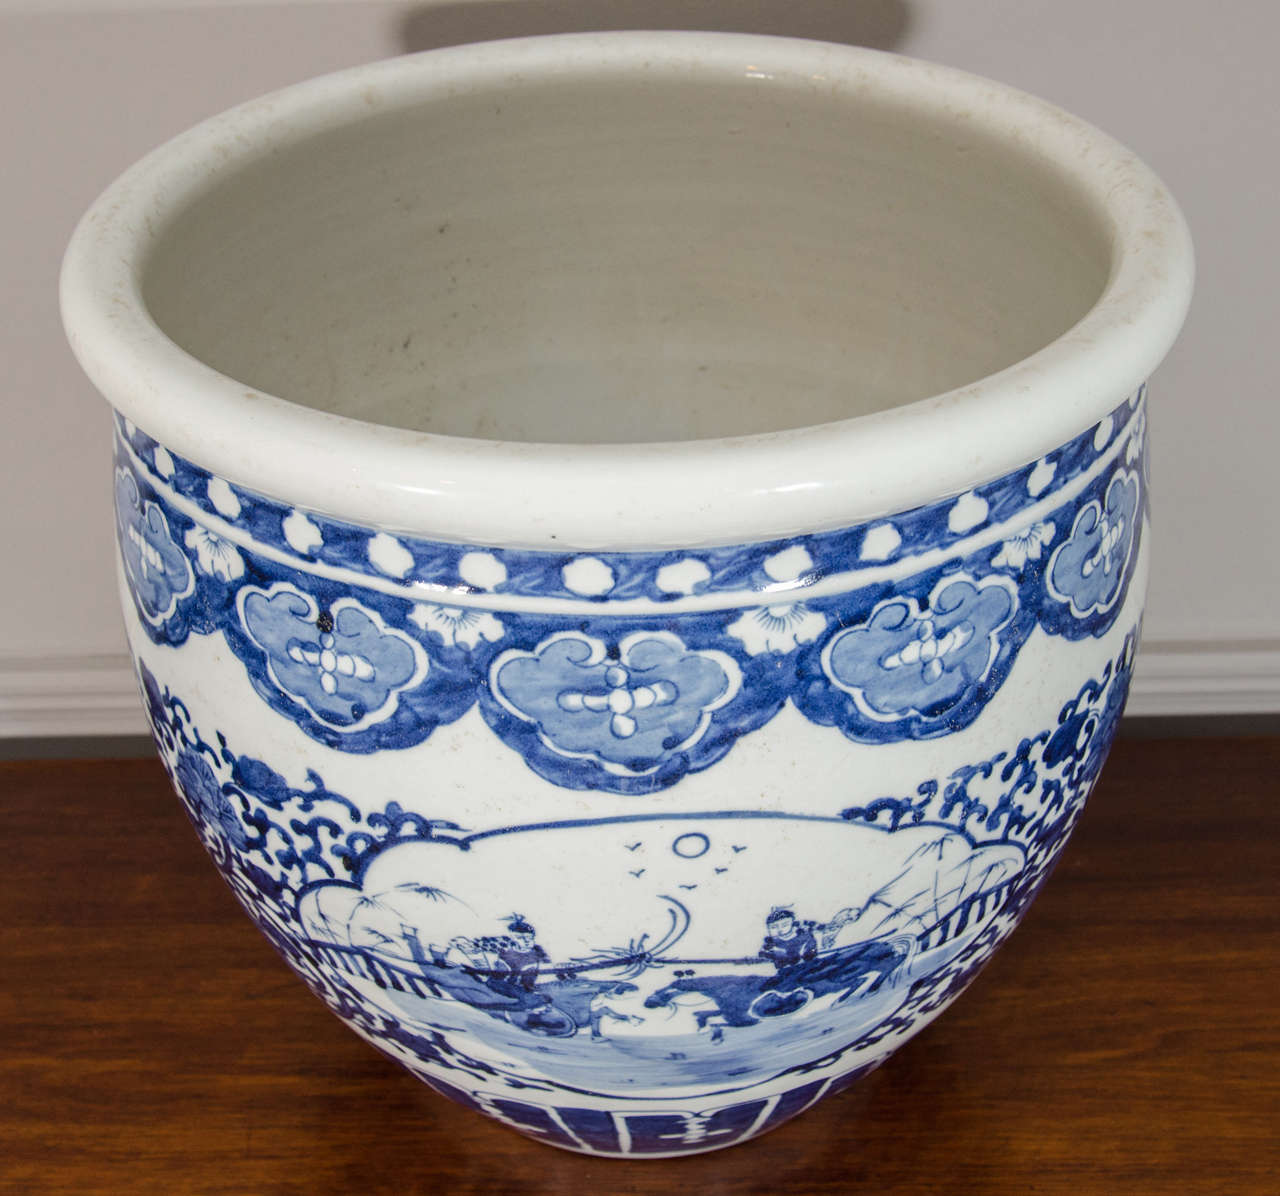 Qing Pair of Chinese Blue and White Porcelain Fish Bowl Planters